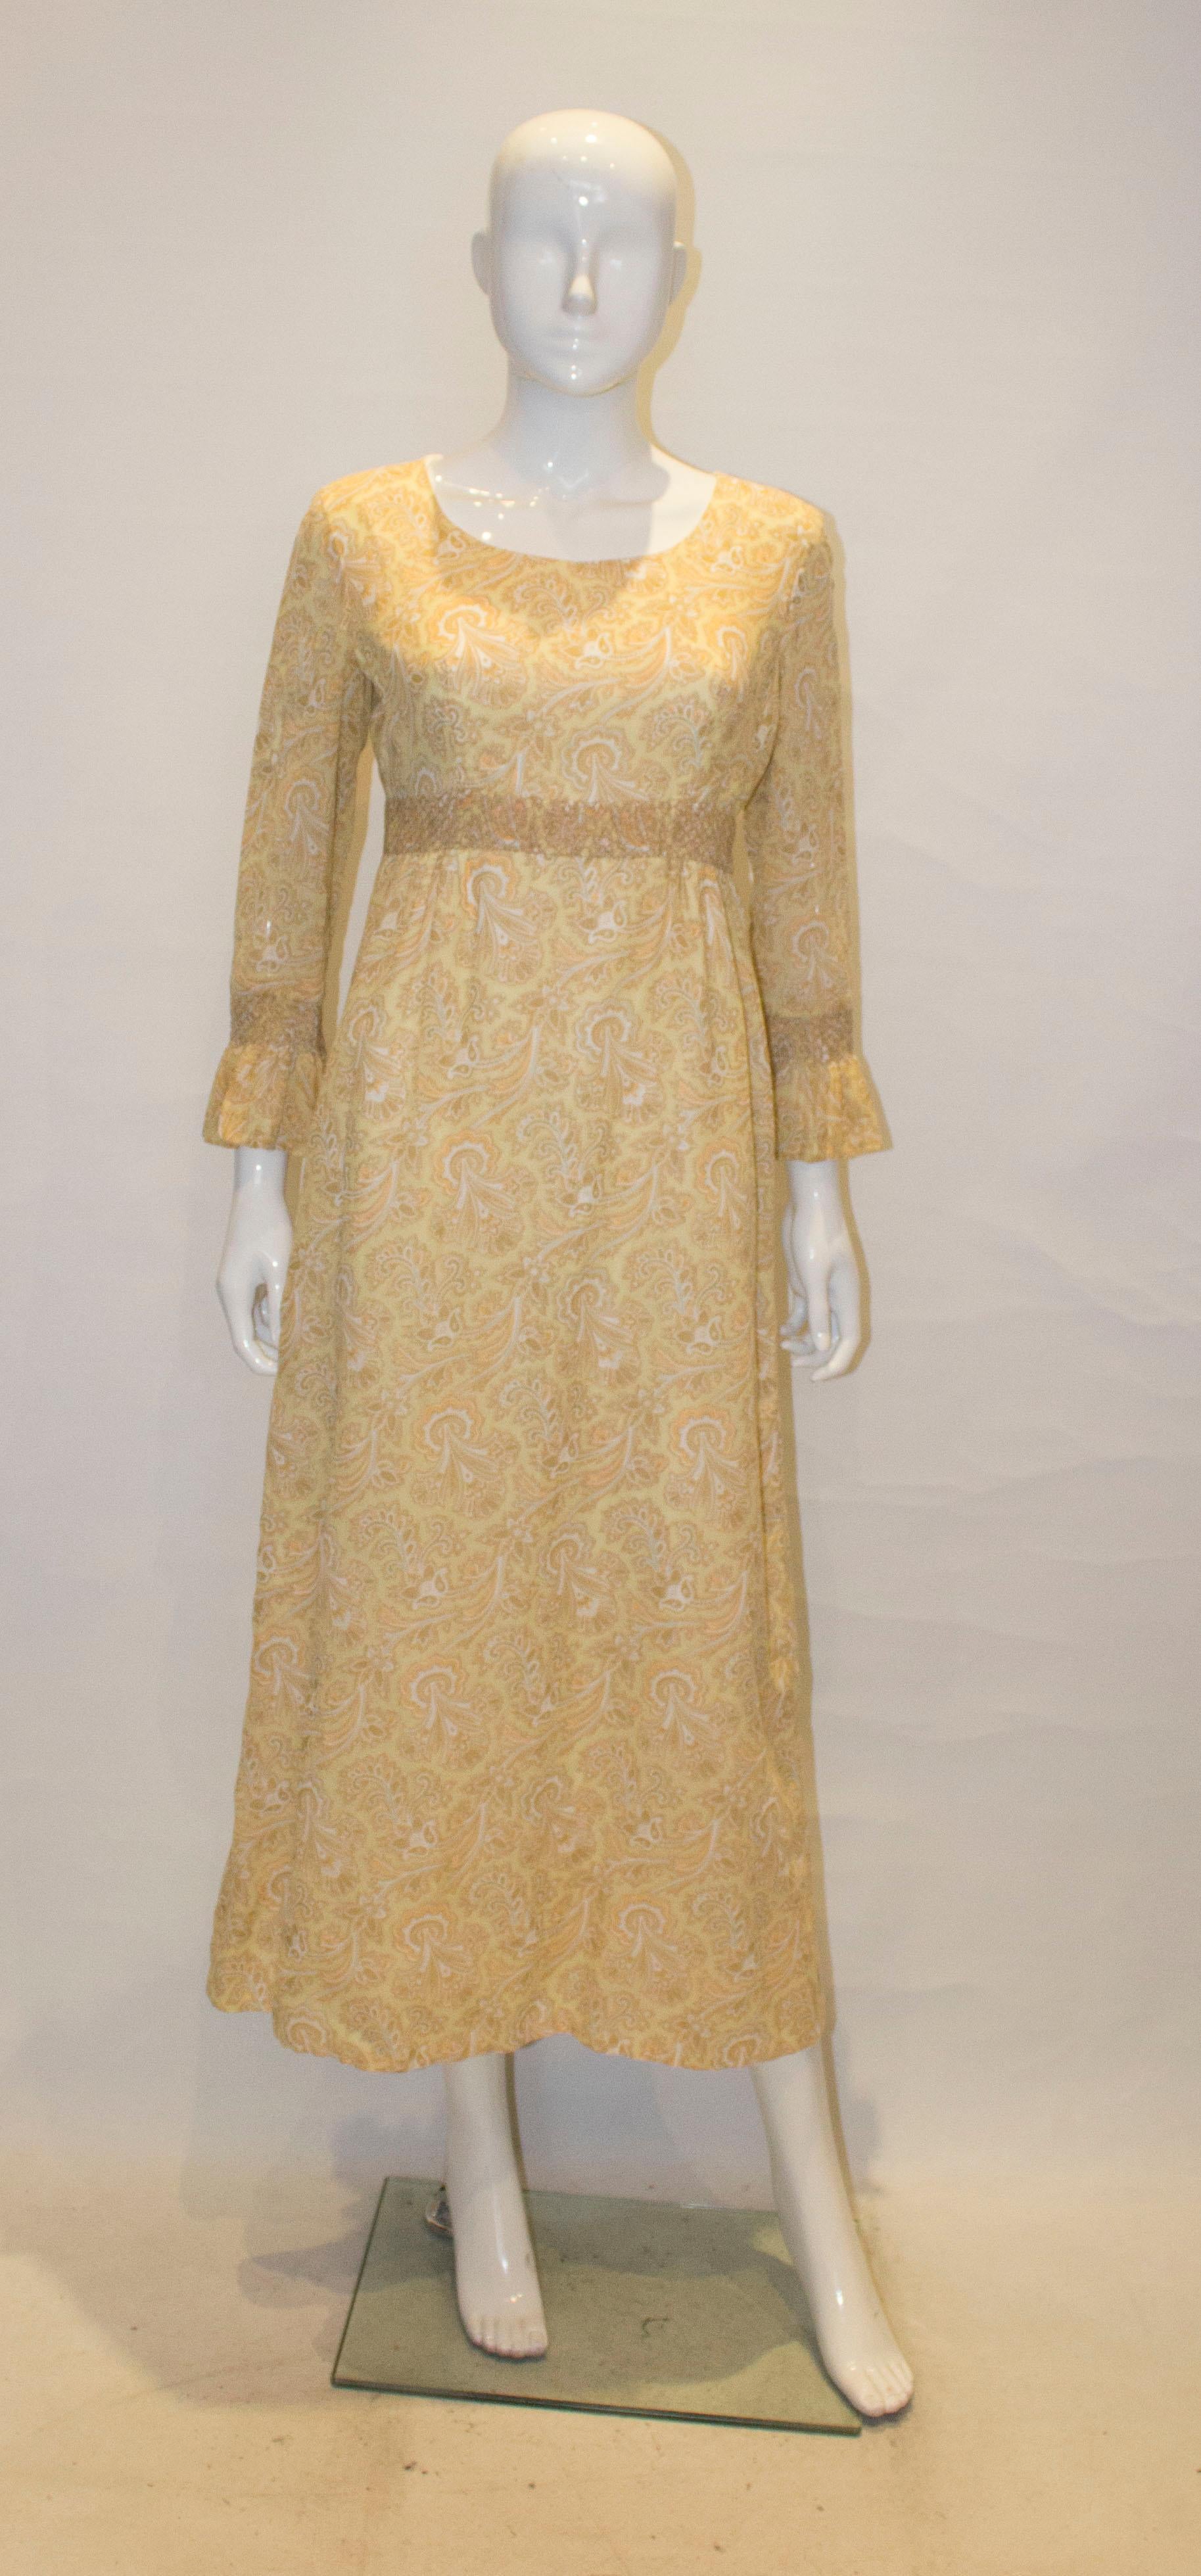 A pretty dress for Spring, in a pale yellow paisley print. The dress has elbow length selves with smocking detail, and there is smocking detail under the bust.  It is fully lined with a central back zip.